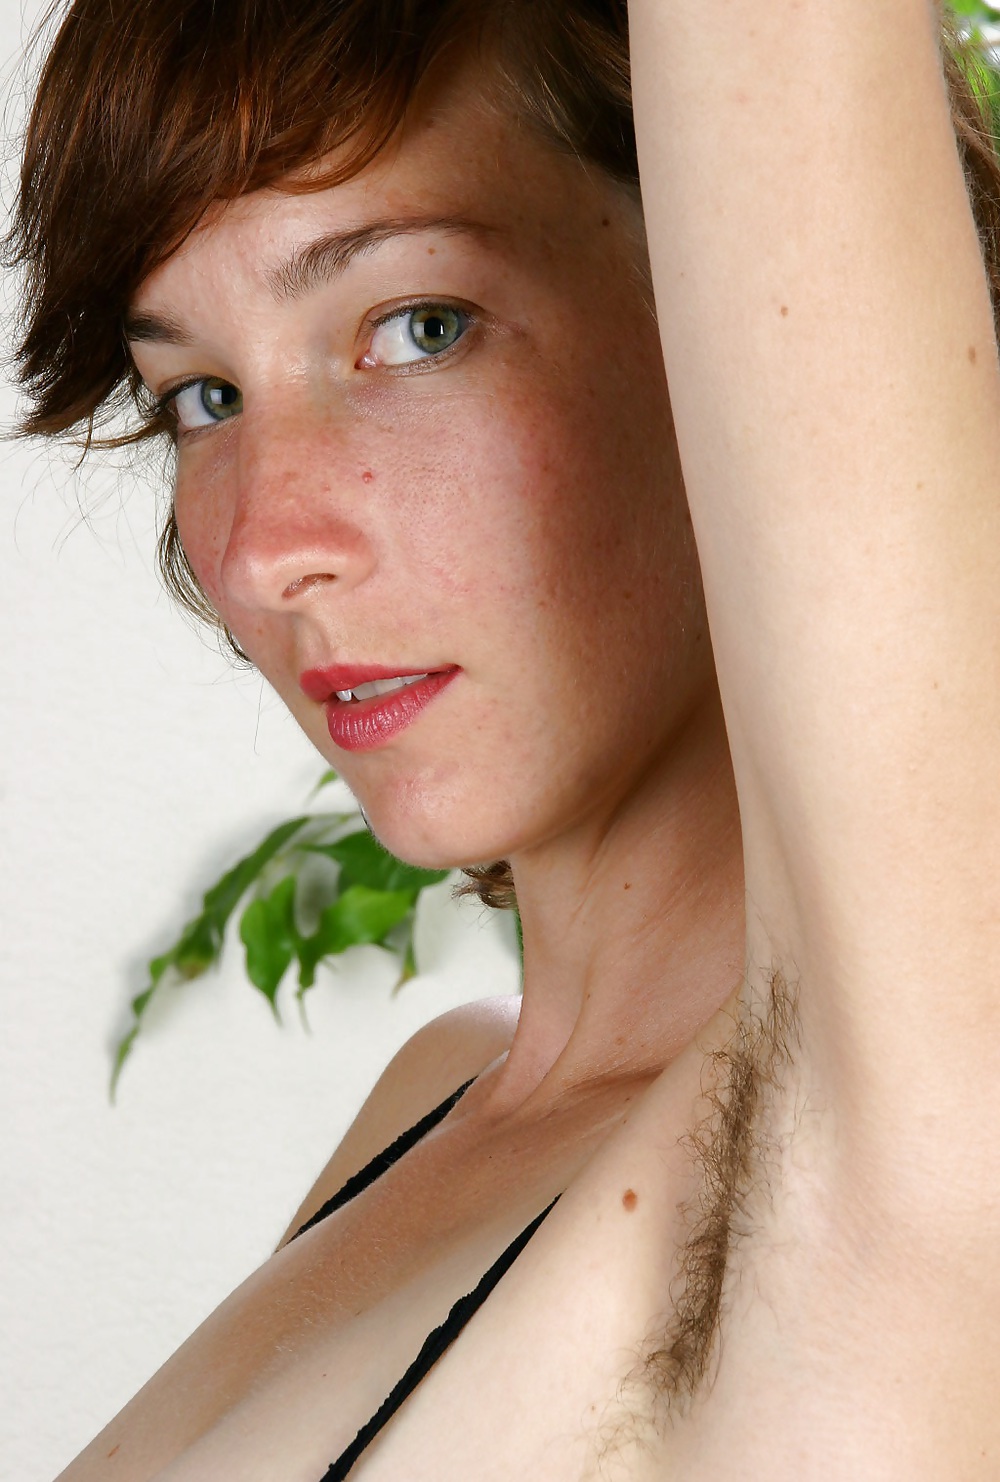 Hairy Armpits - Alex young cutie #25625945